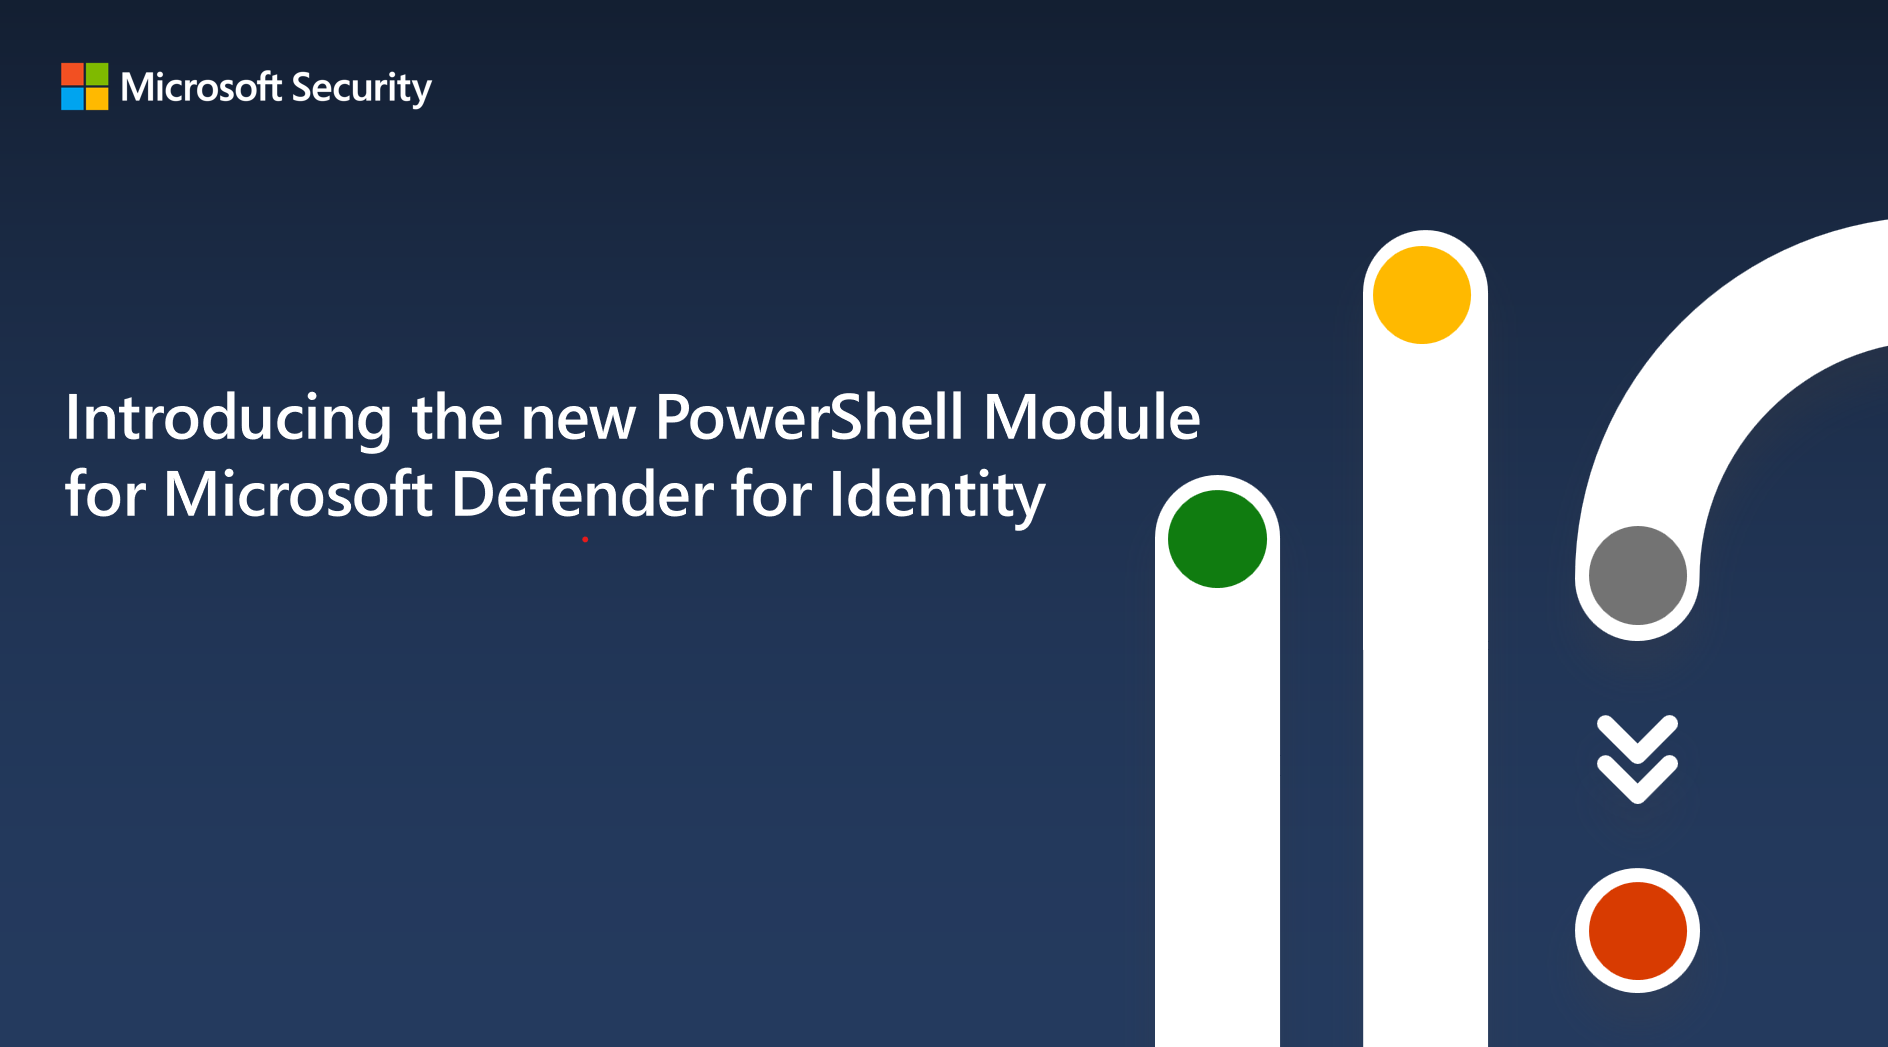 Introducing the new PowerShell Module for Microsoft Defender for Identity